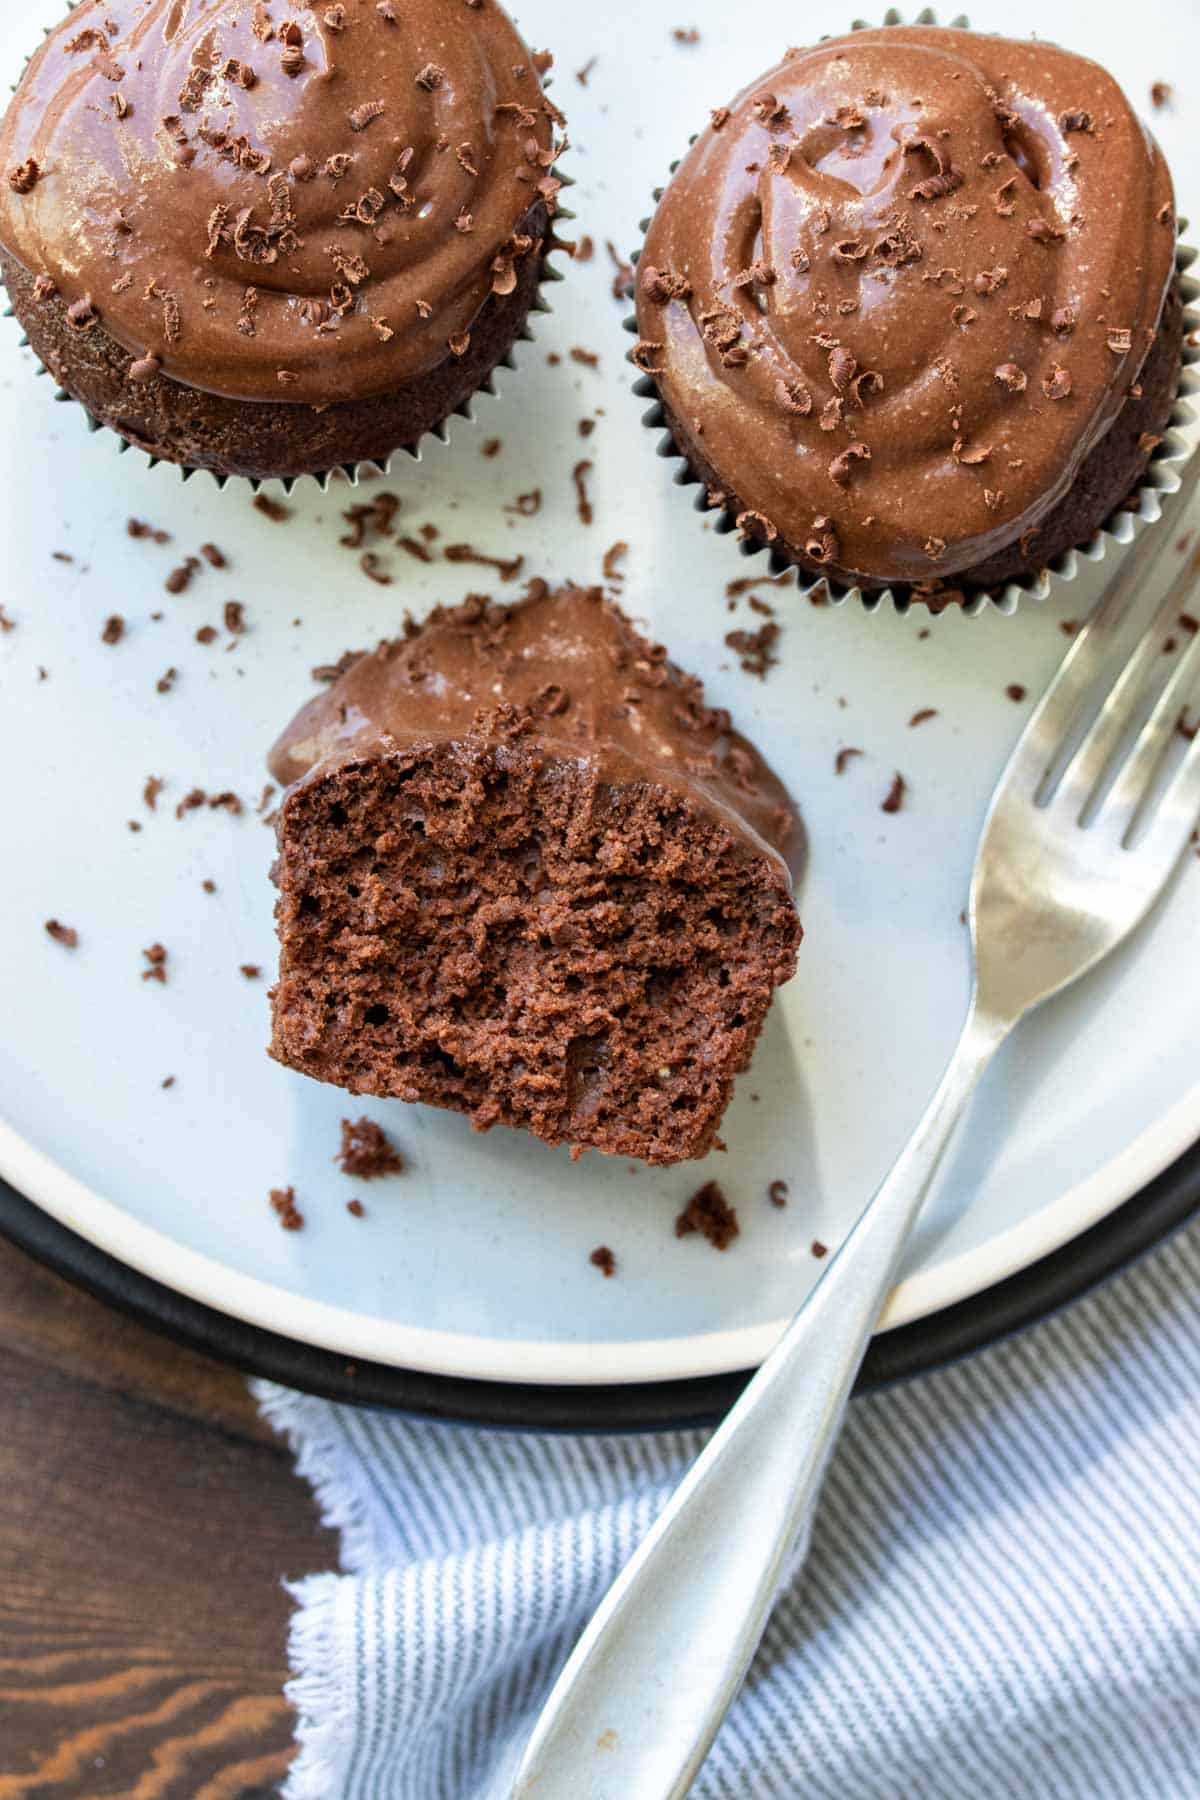 Half eaten chocolate cupcake with chocolate frosting on a white plate